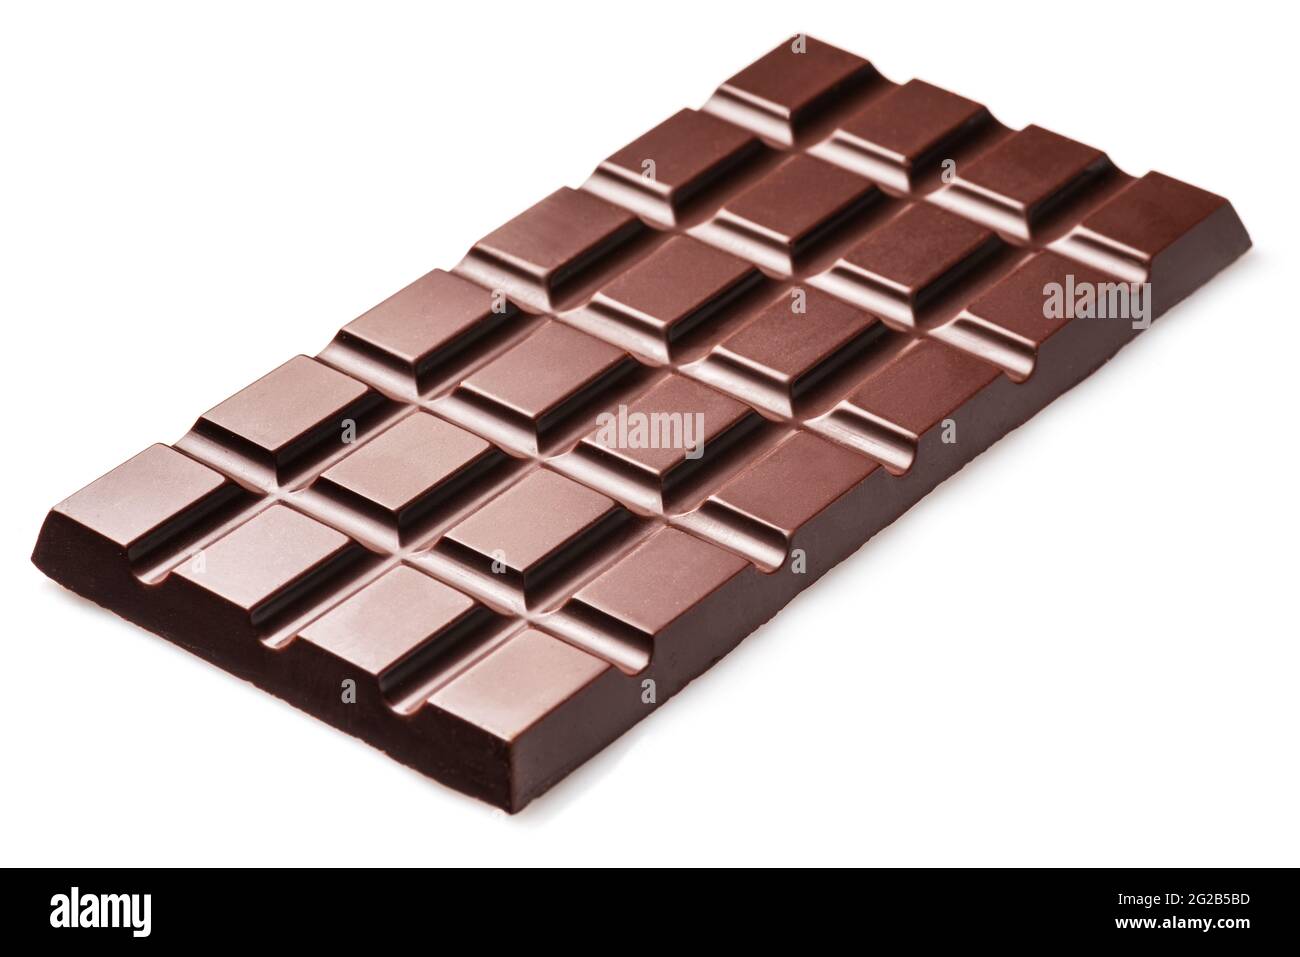 Dark chocolate bar isolated on white background. Sweet food is made of cocoa and sugar. Stock Photo